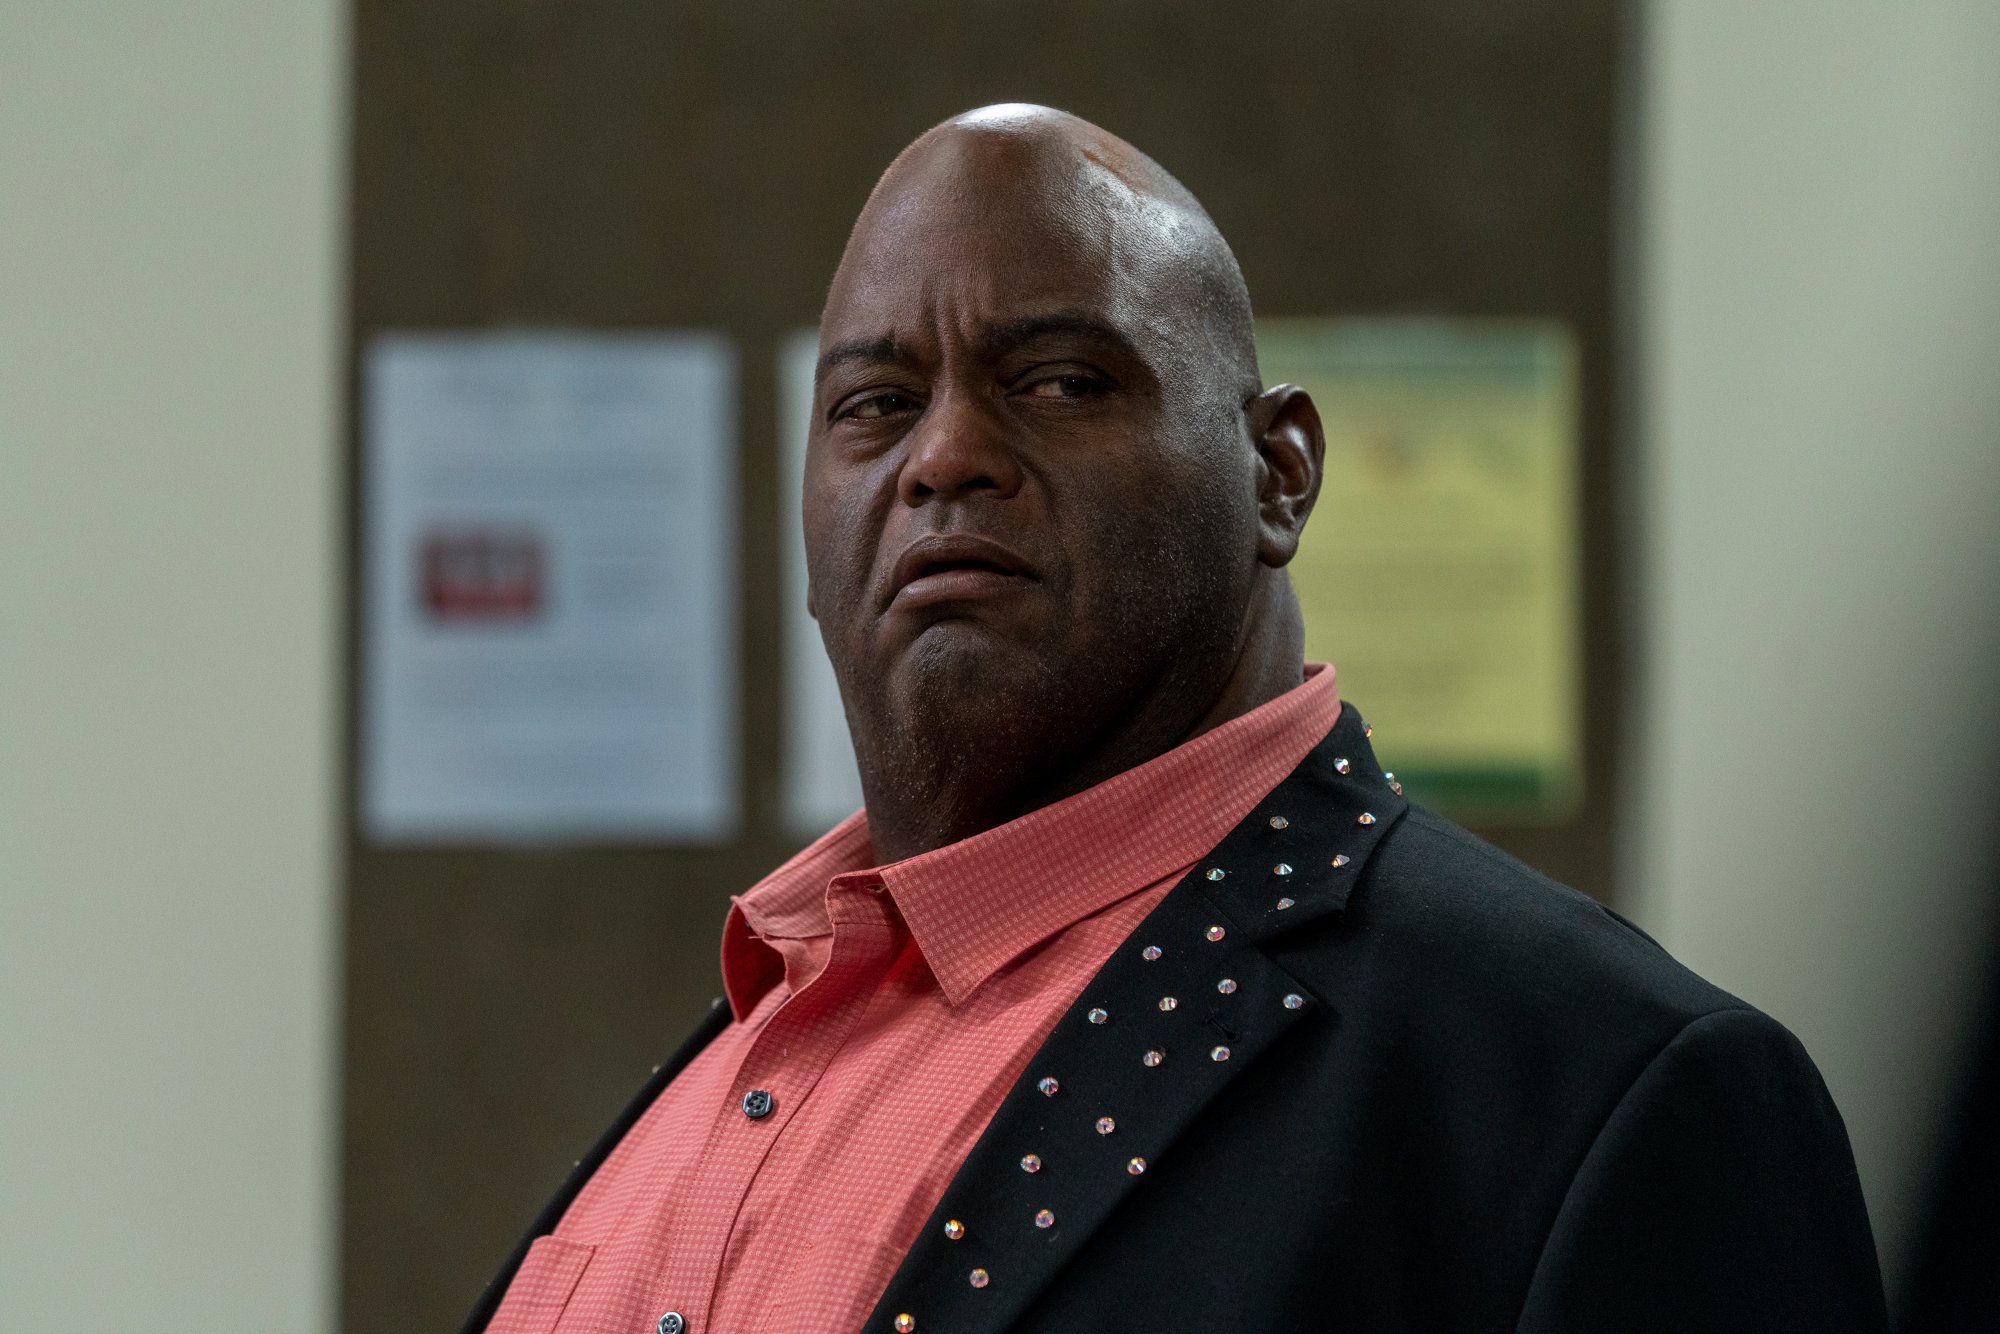 Lavell Crawford as Huell in 'Better Call Saul.' The last time fans saw the character was in 'Breaking Bad' Season 5. In this image, he's wearing a pink collared shirt and dark jacket.